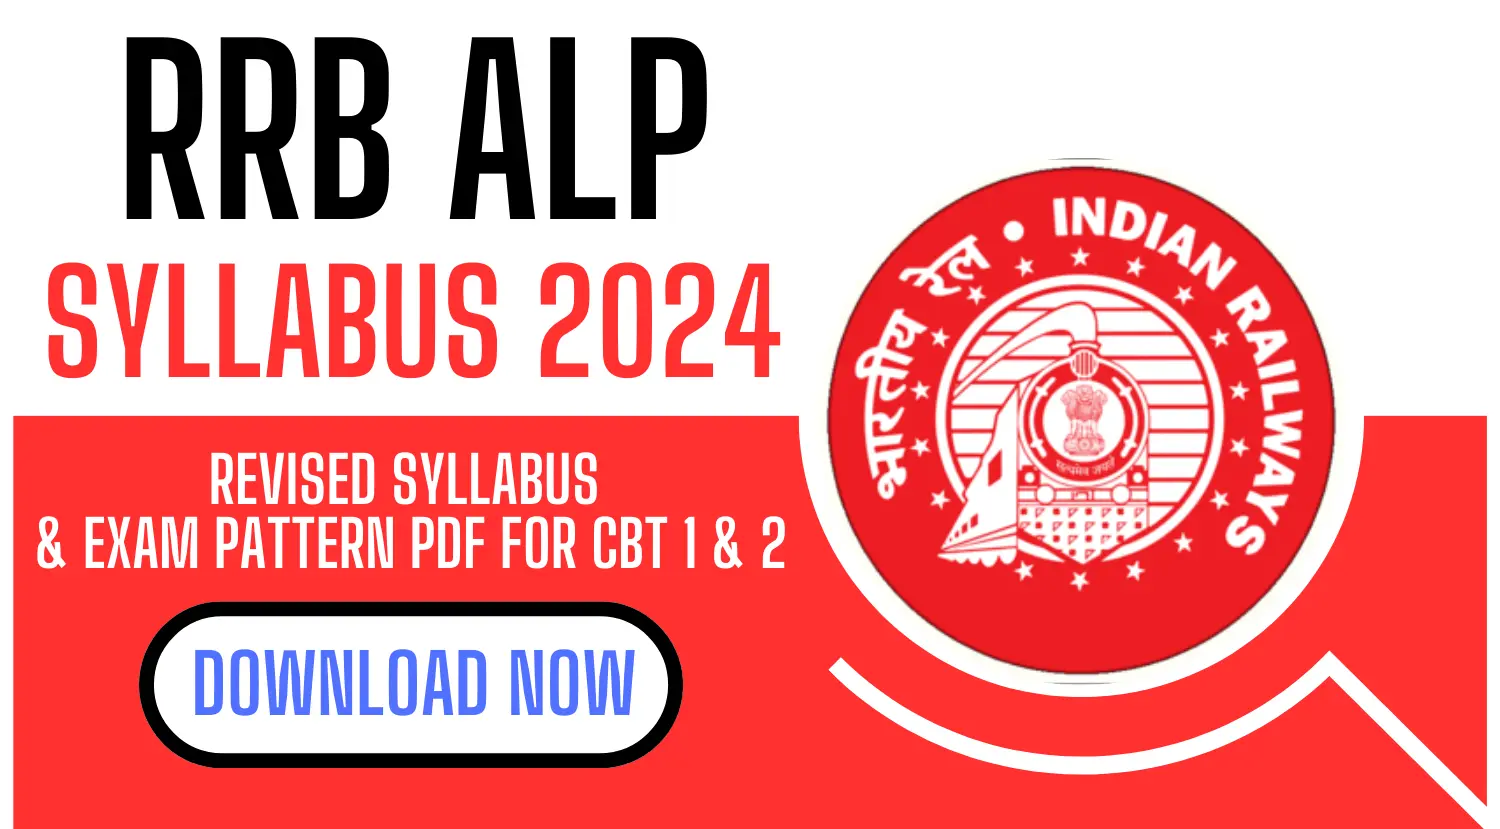 RRB ALP 2024 Revised Syllabus Exam Pattern PDF for CBT 1 2